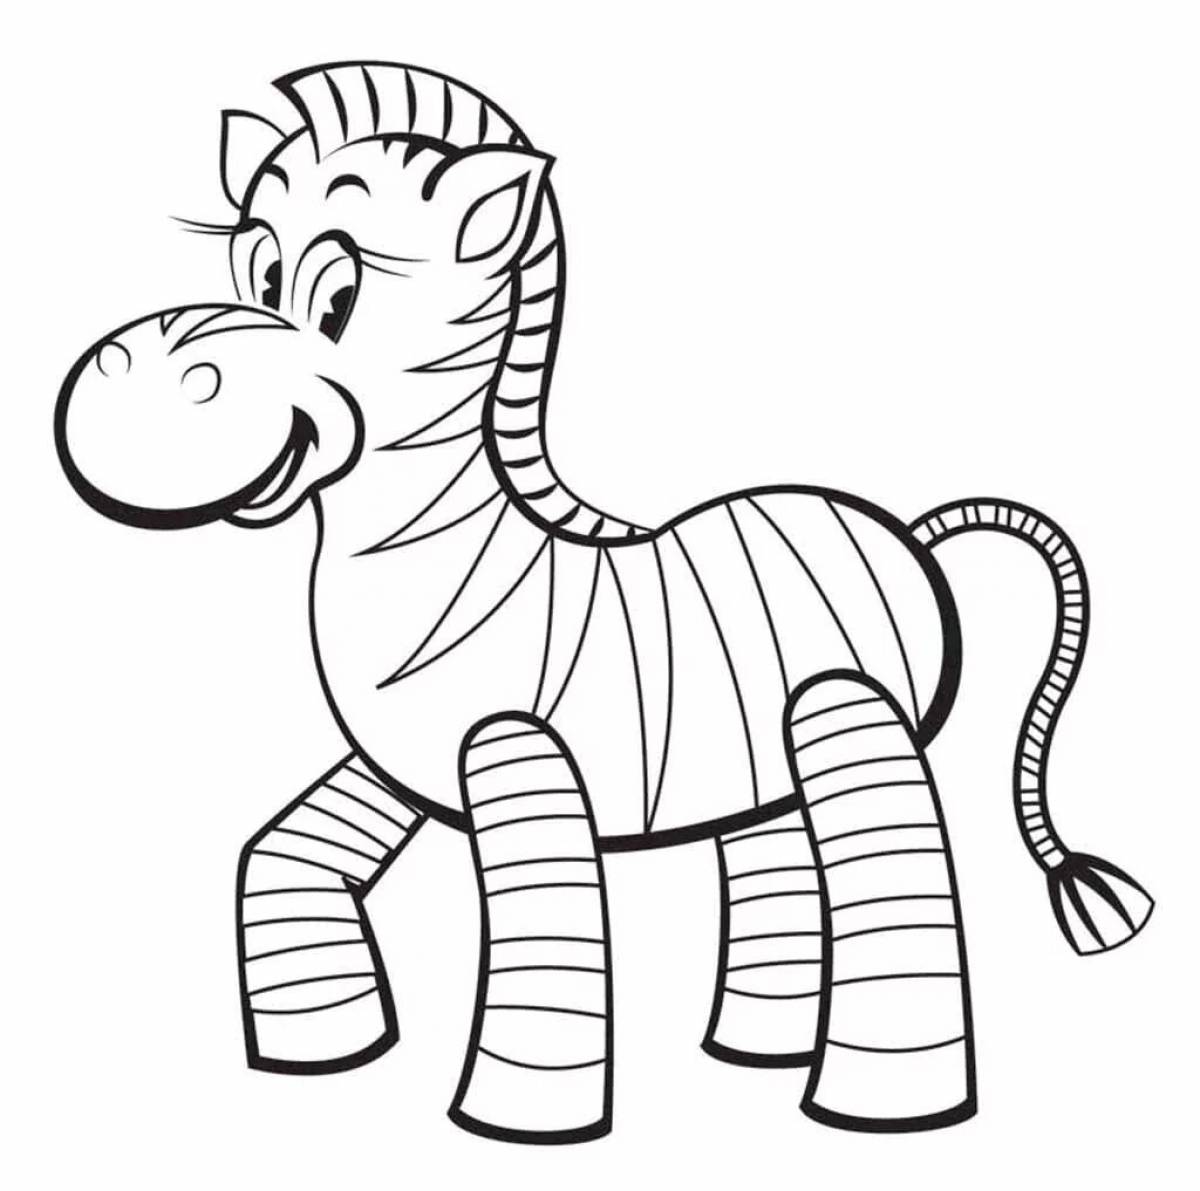 Unforgettable zebra coloring book for kids 3-4 years old